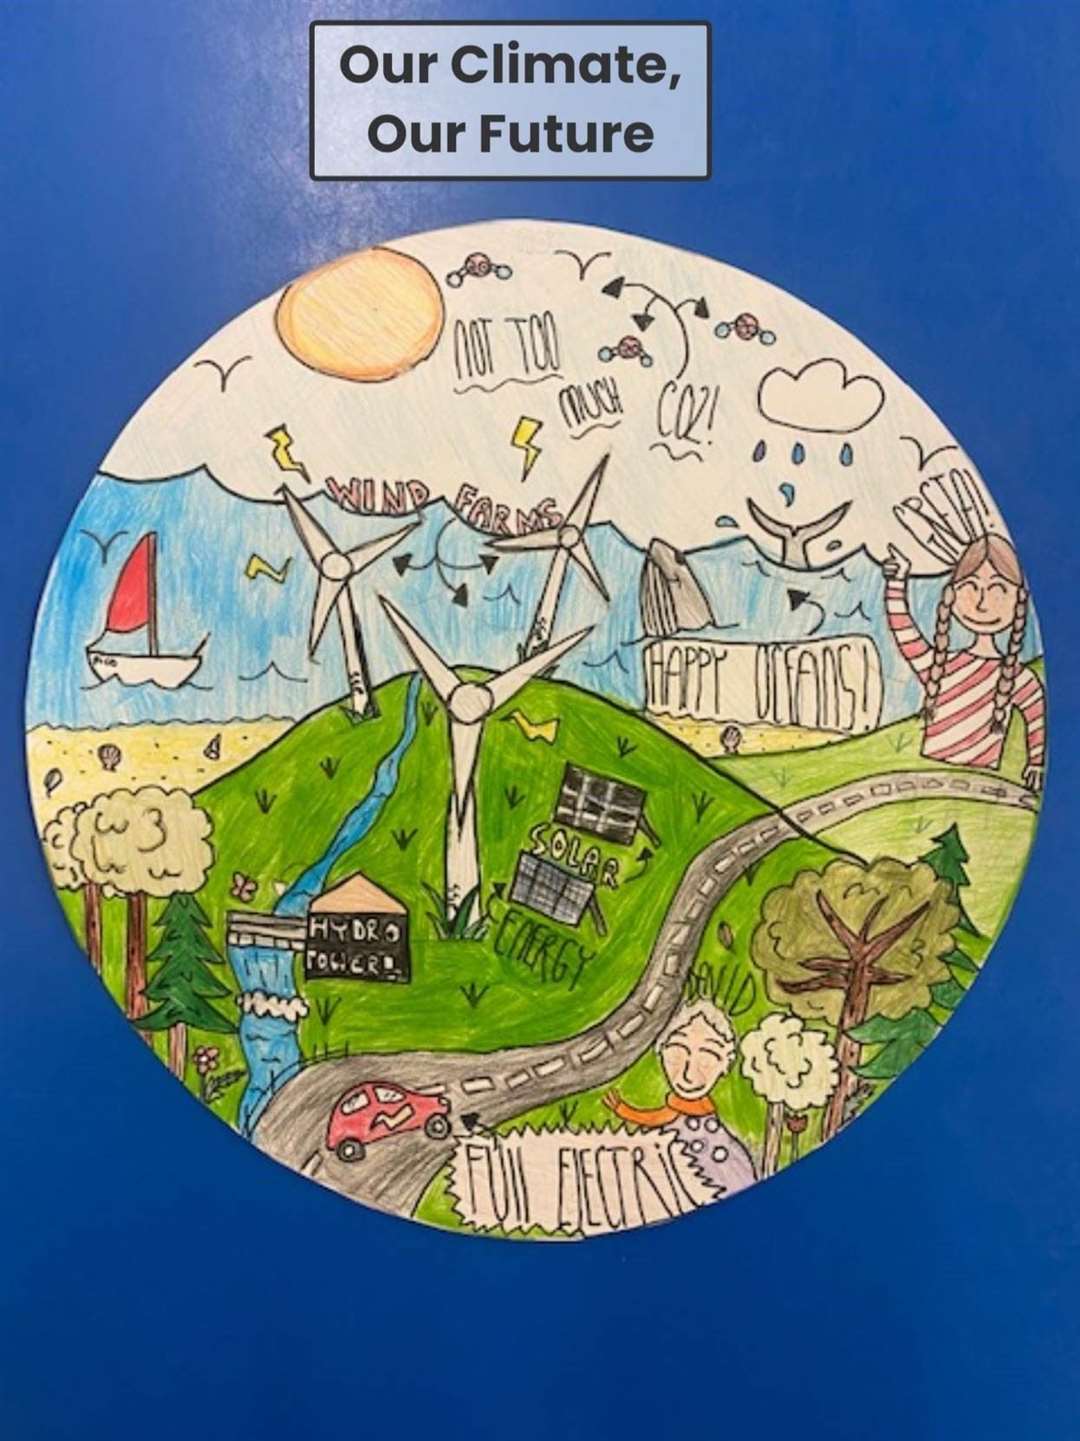 Climate change artwork by a Rosehall Primary School pupil.